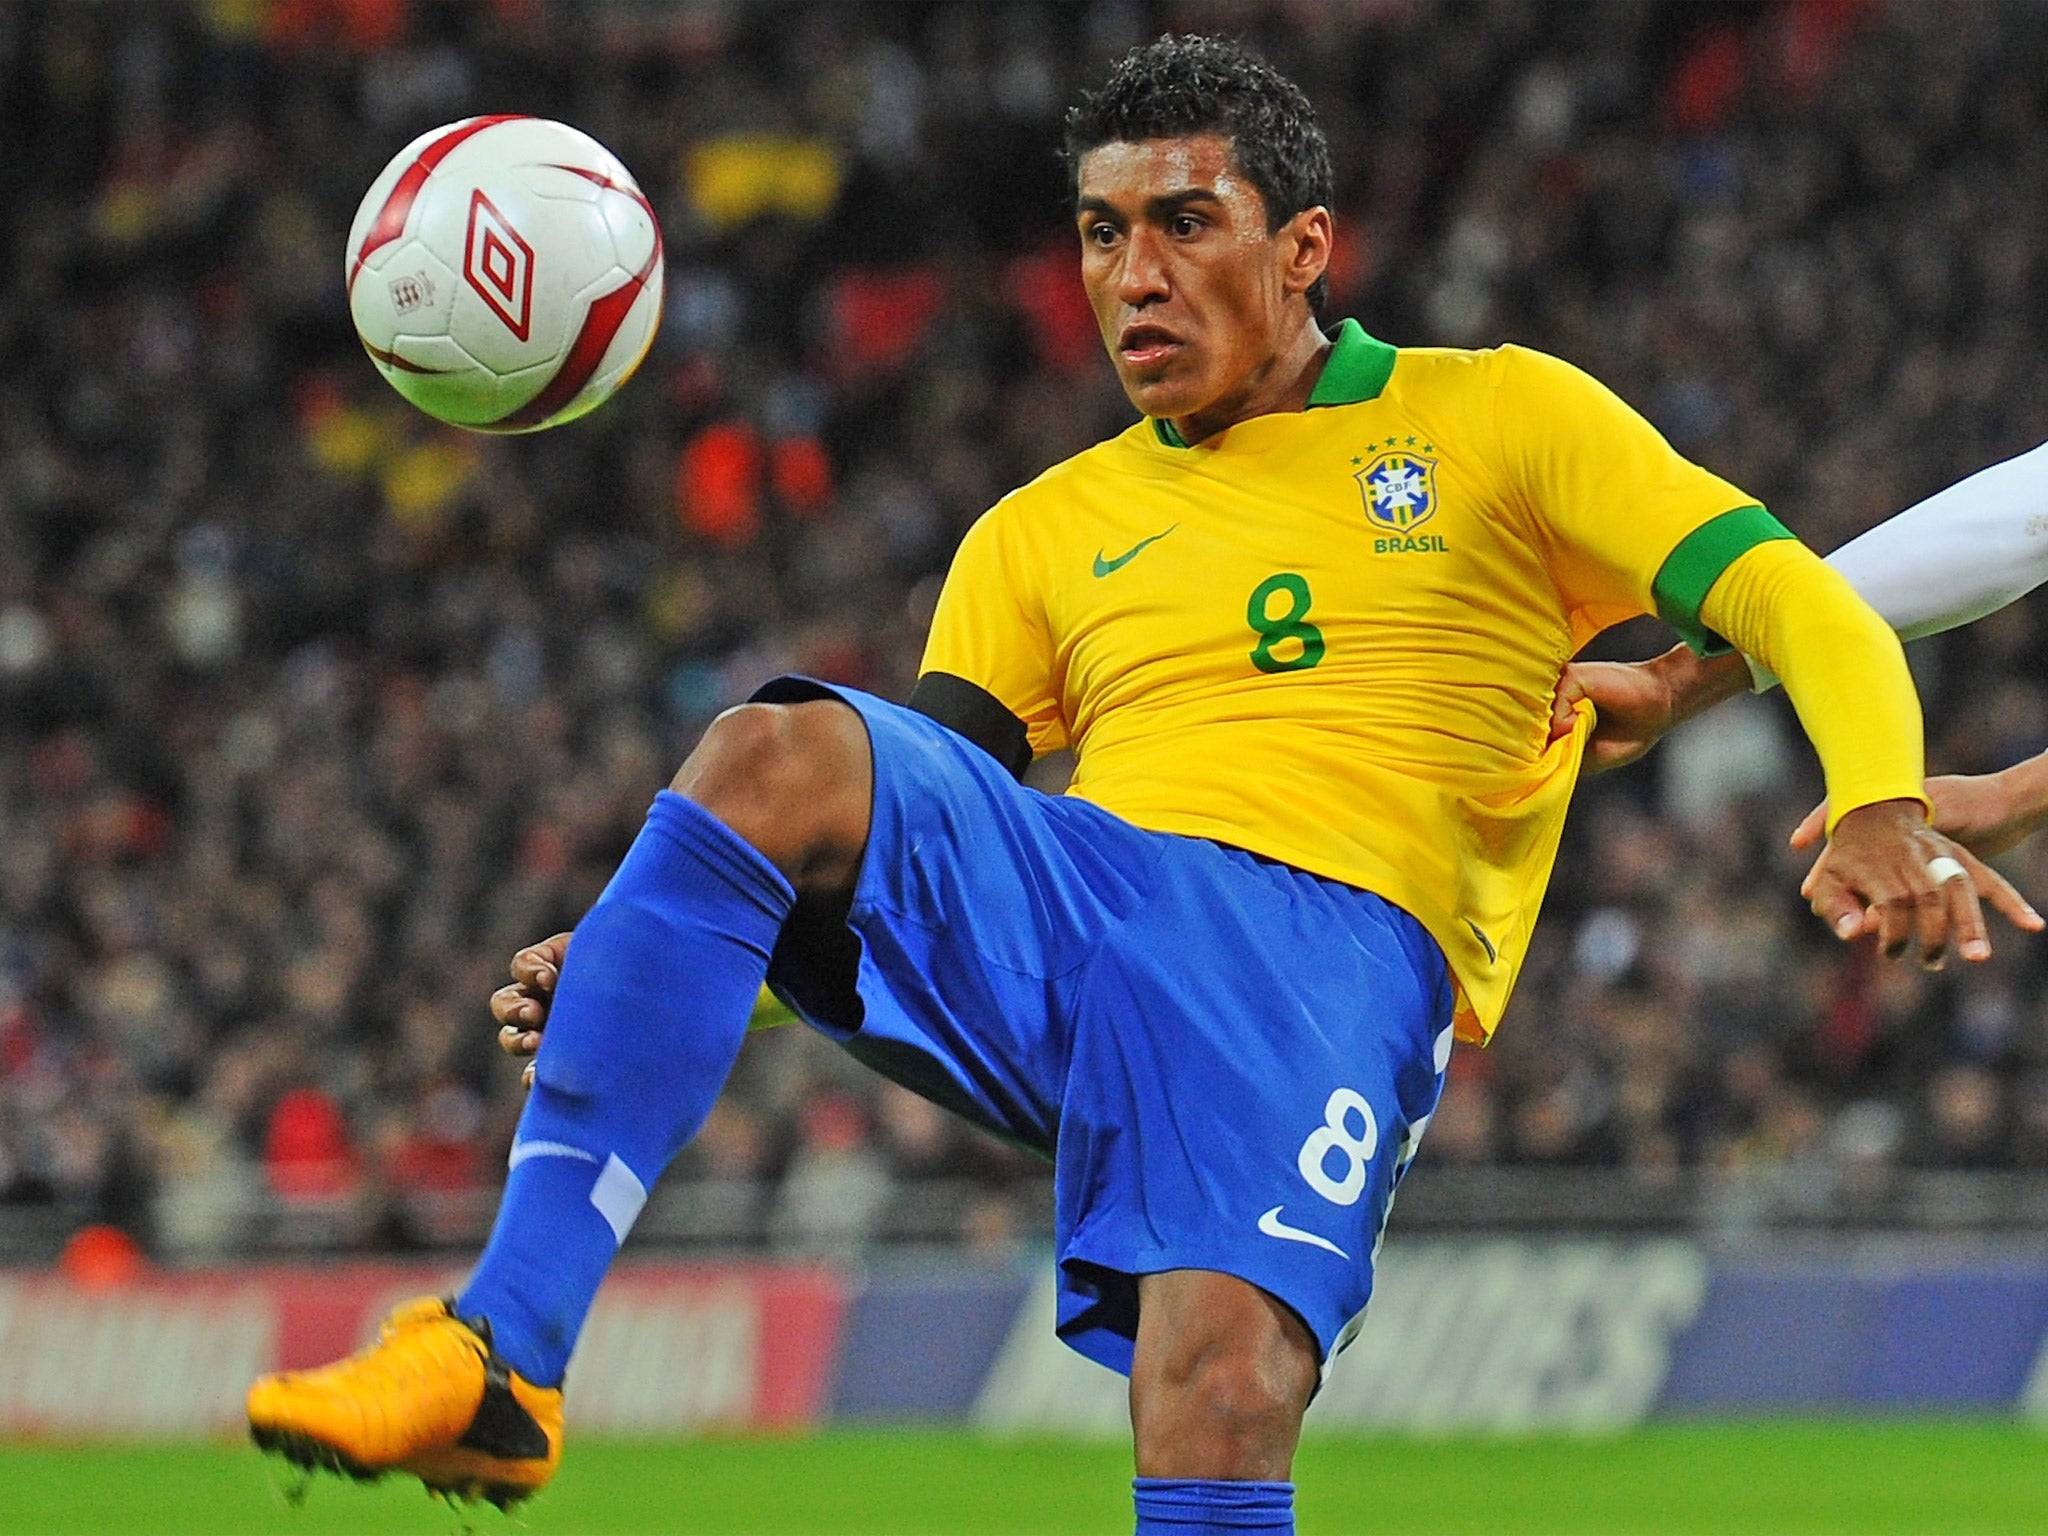 PAULINHO: Looked off the pace in midfield, not least when Rooney darted in front of him to set up Lampard’s goal. 5